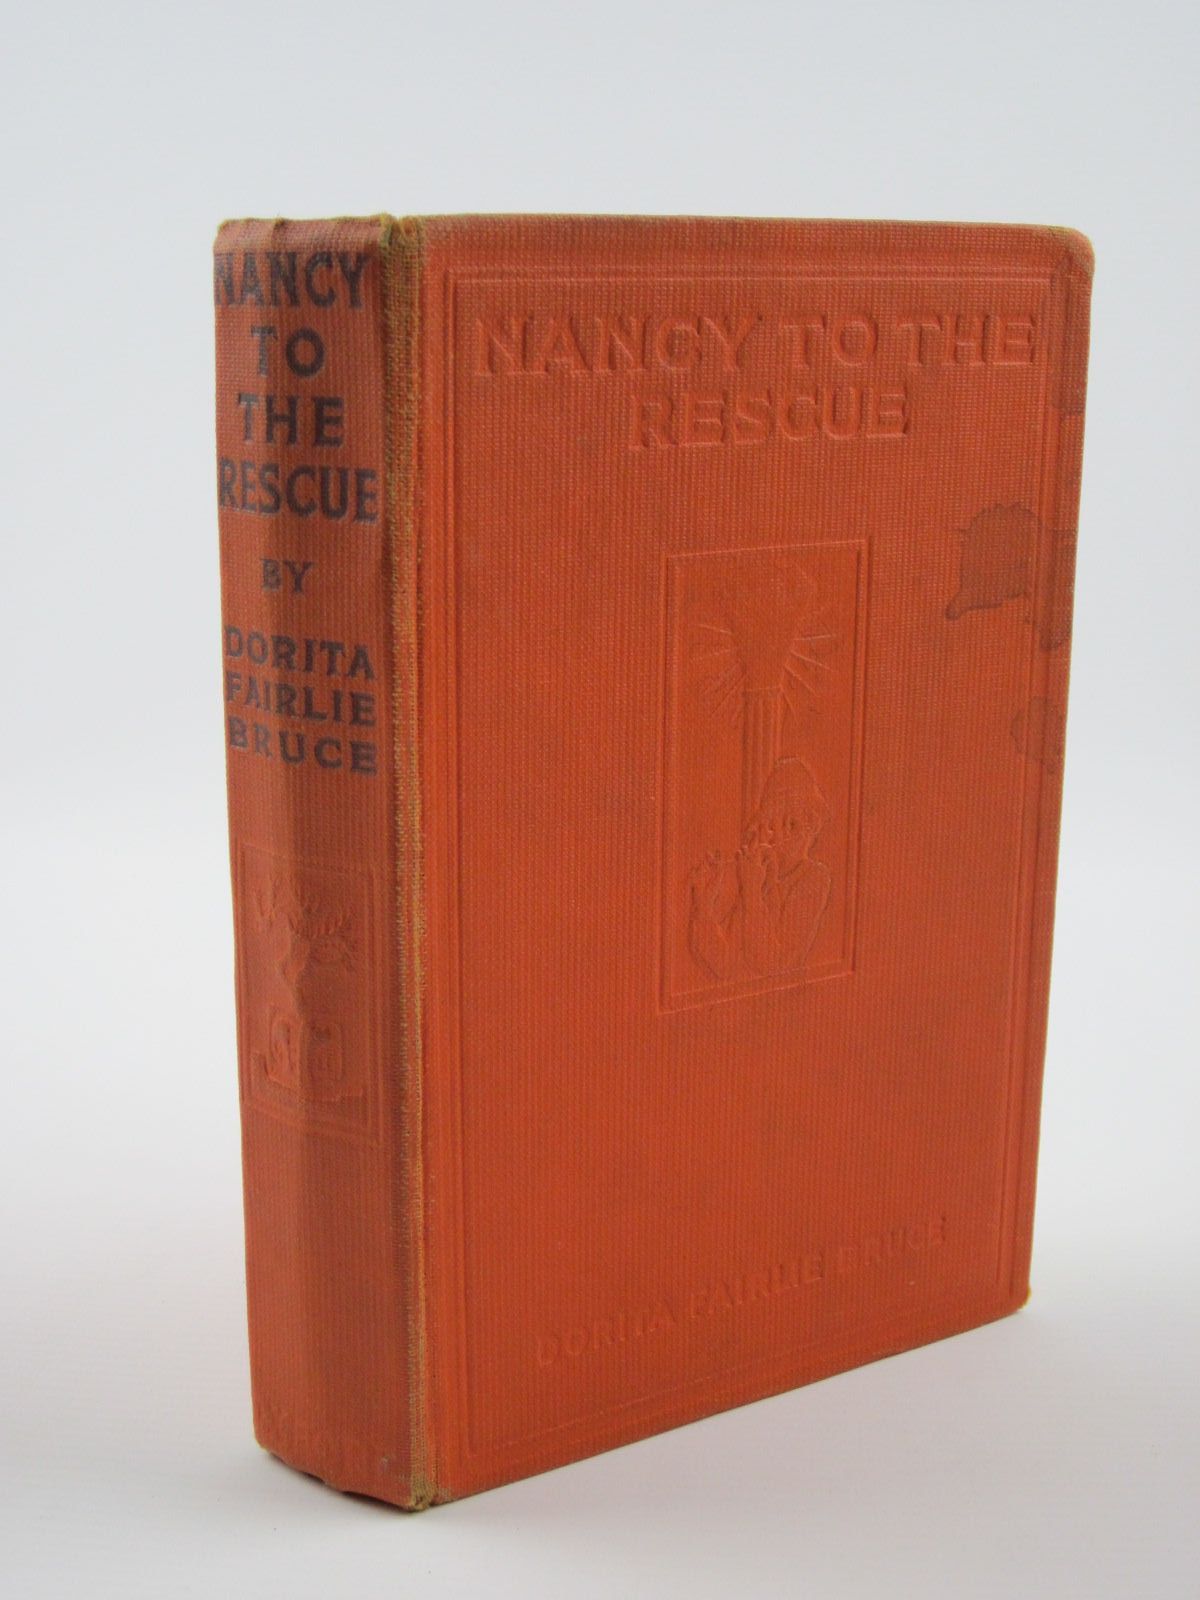 Photo of NANCY TO THE RESCUE written by Bruce, Dorita Fairlie published by Oxford University Press, Humphrey Milford (STOCK CODE: 1309636)  for sale by Stella & Rose's Books